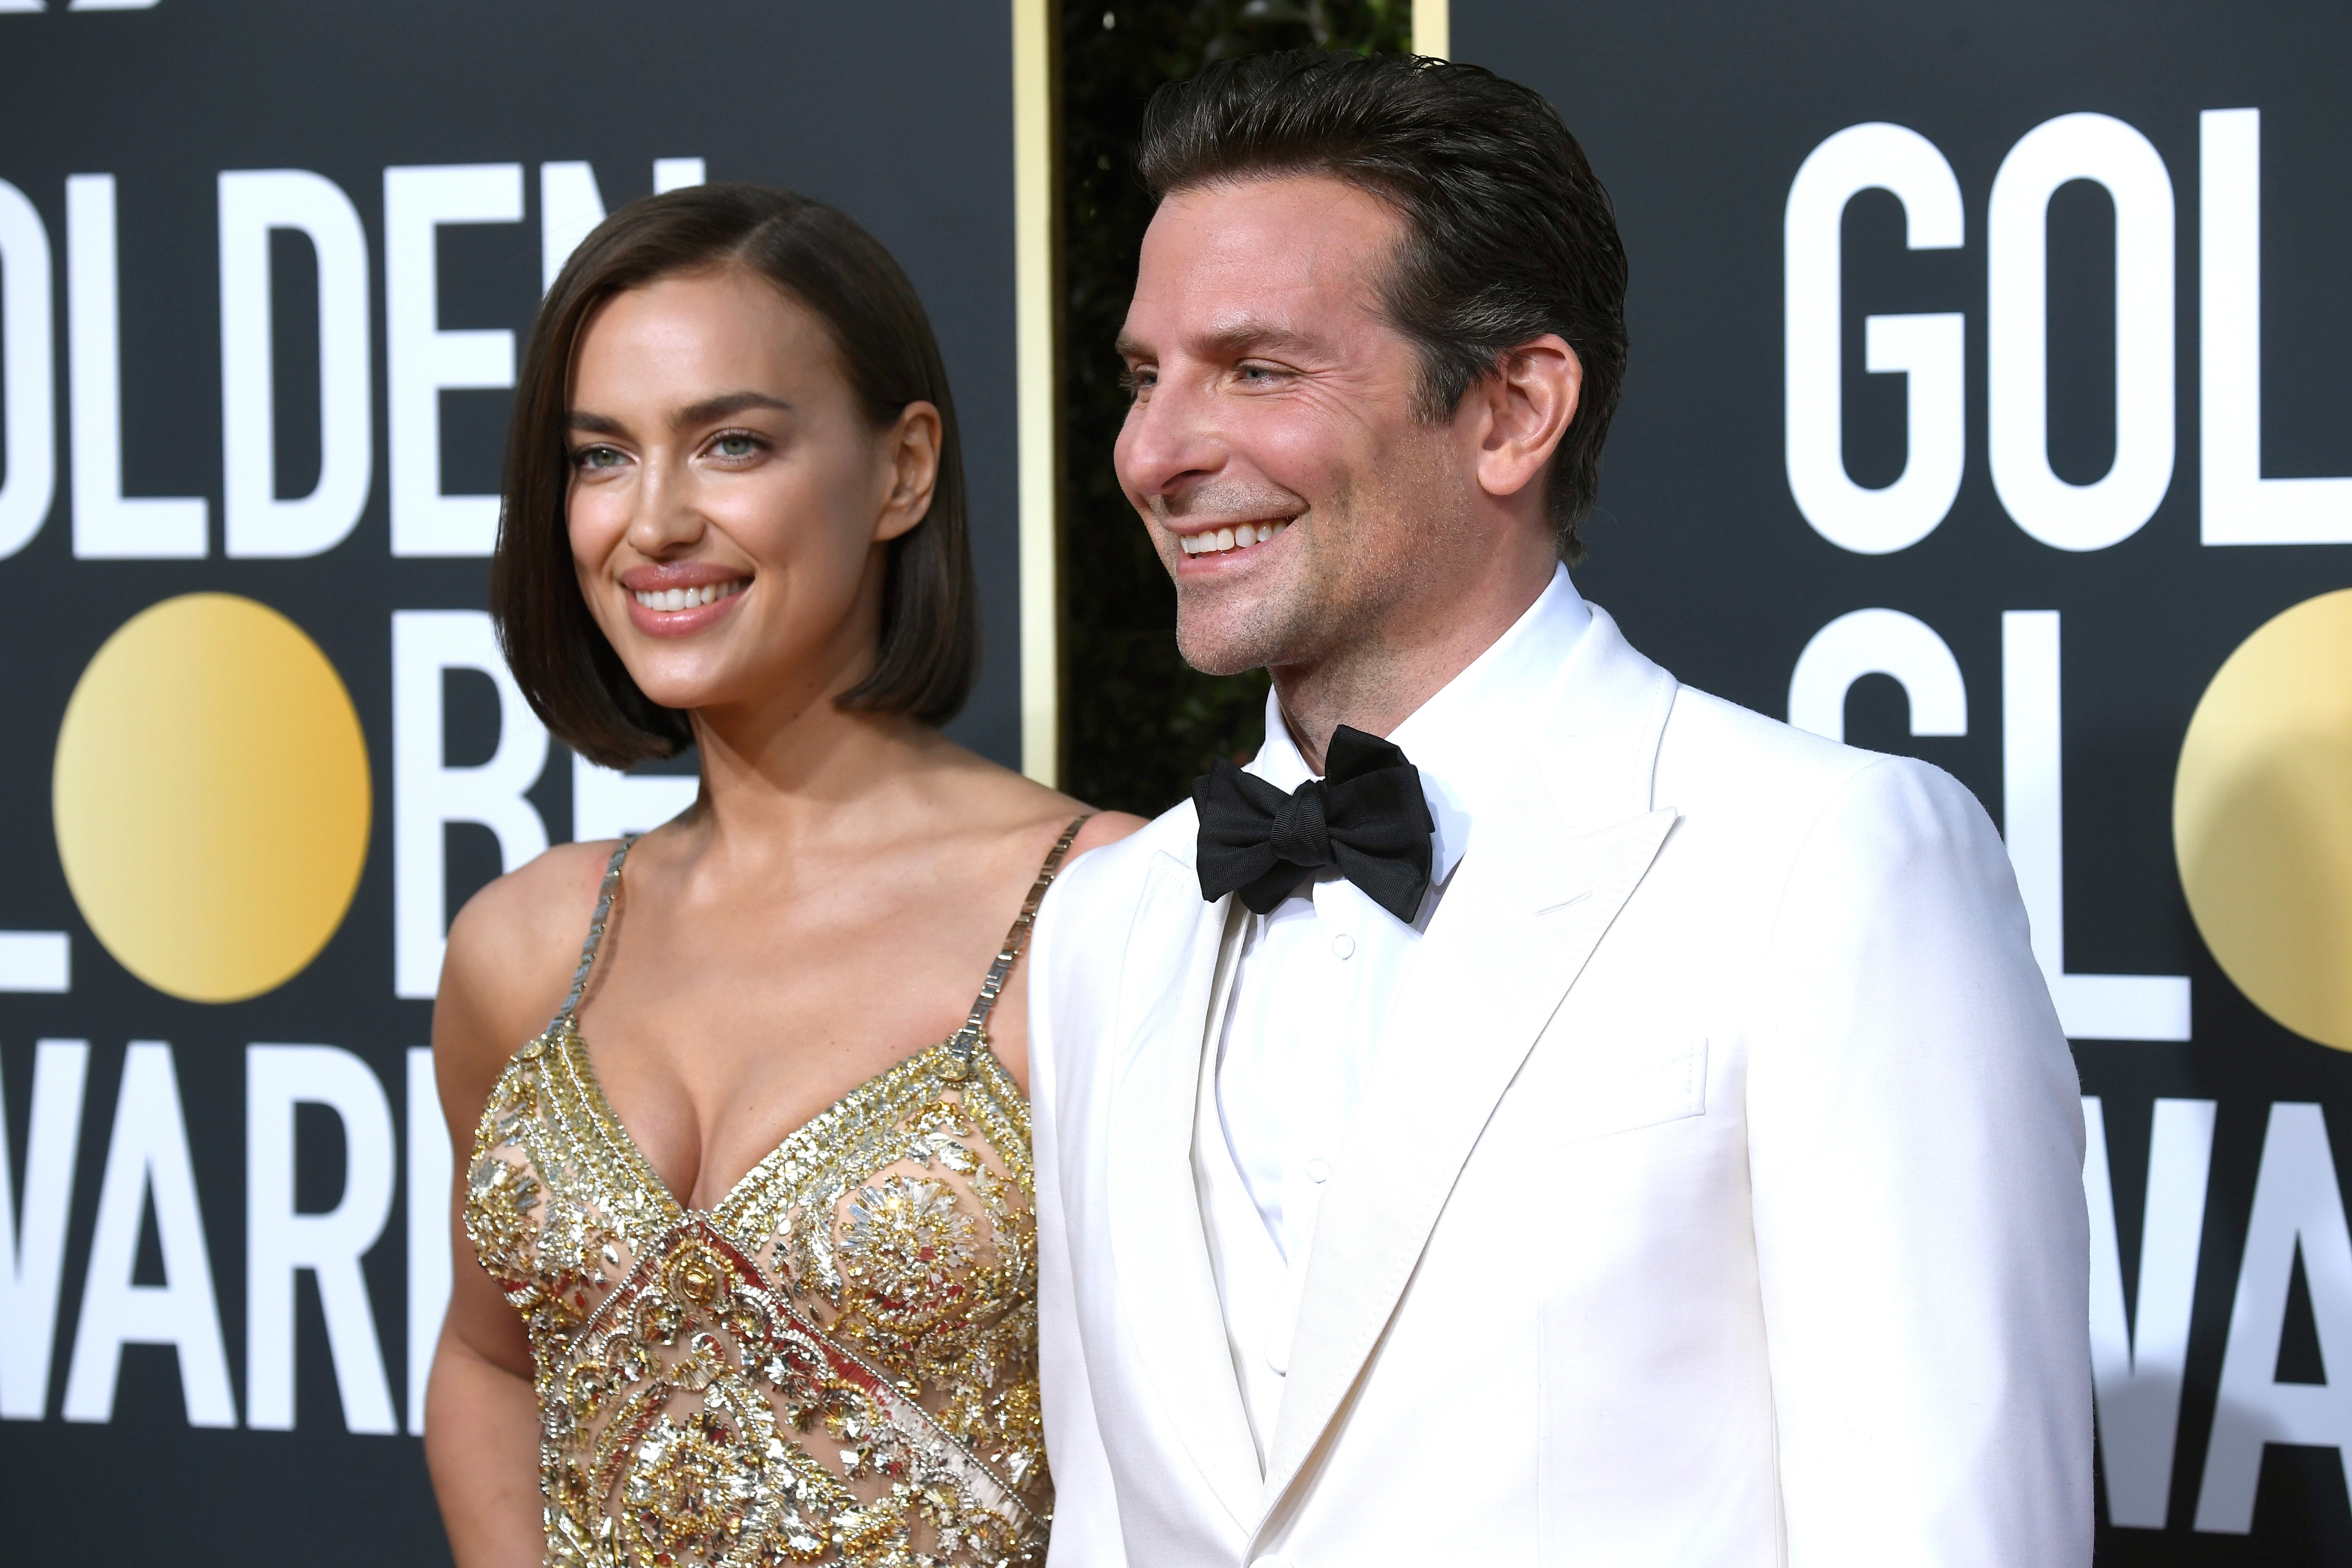 Irina Shayk (L) and Bradley Cooper attend the 76th Annual Golden Globe Awards at The Beverly Hilton Hotel on January 6, 2019 in Beverly Hills, California. (Photo by Frazer Harrison/Getty Images)